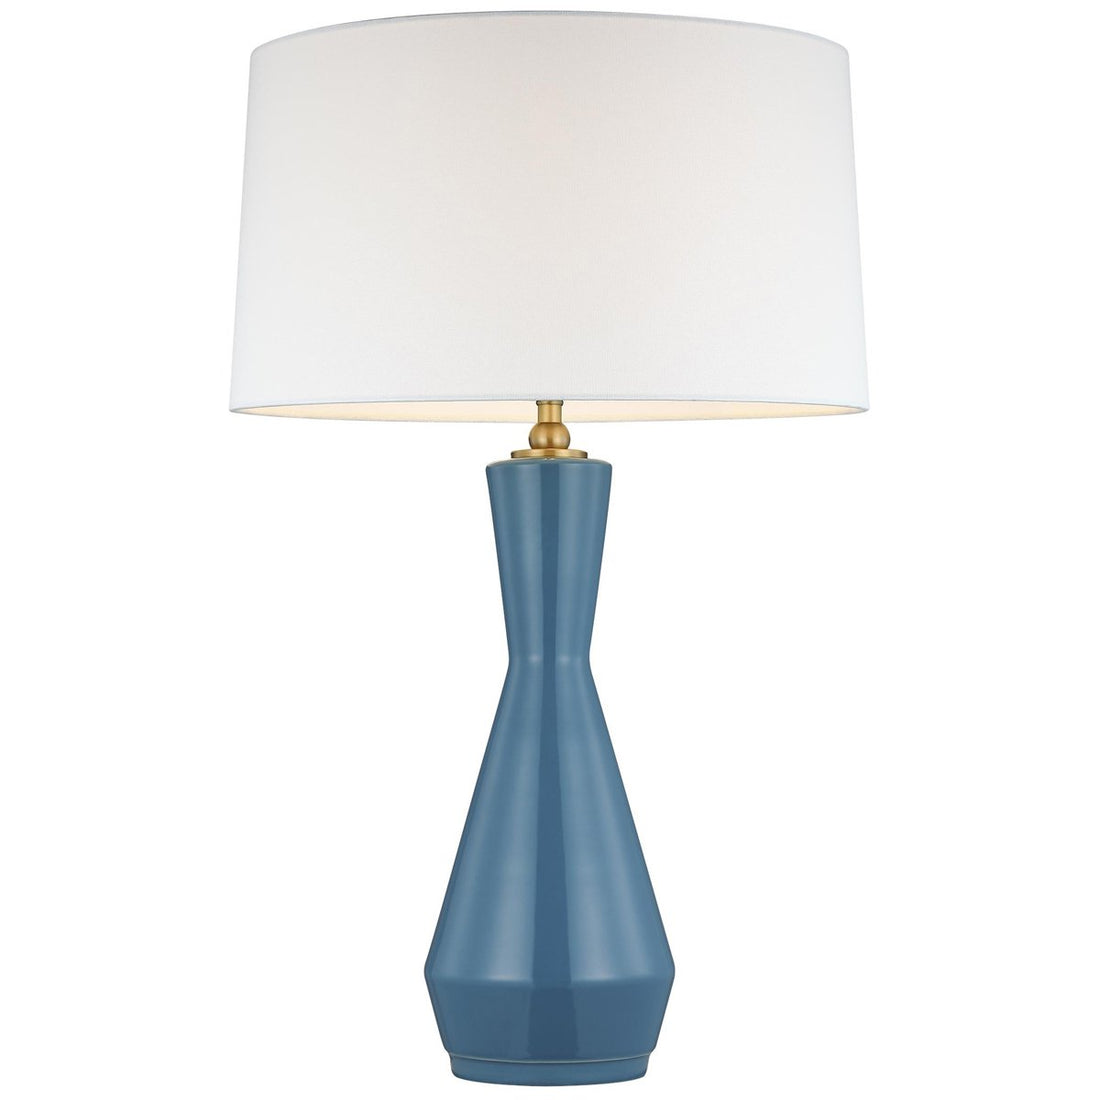 Feiss Jens Table Lamp